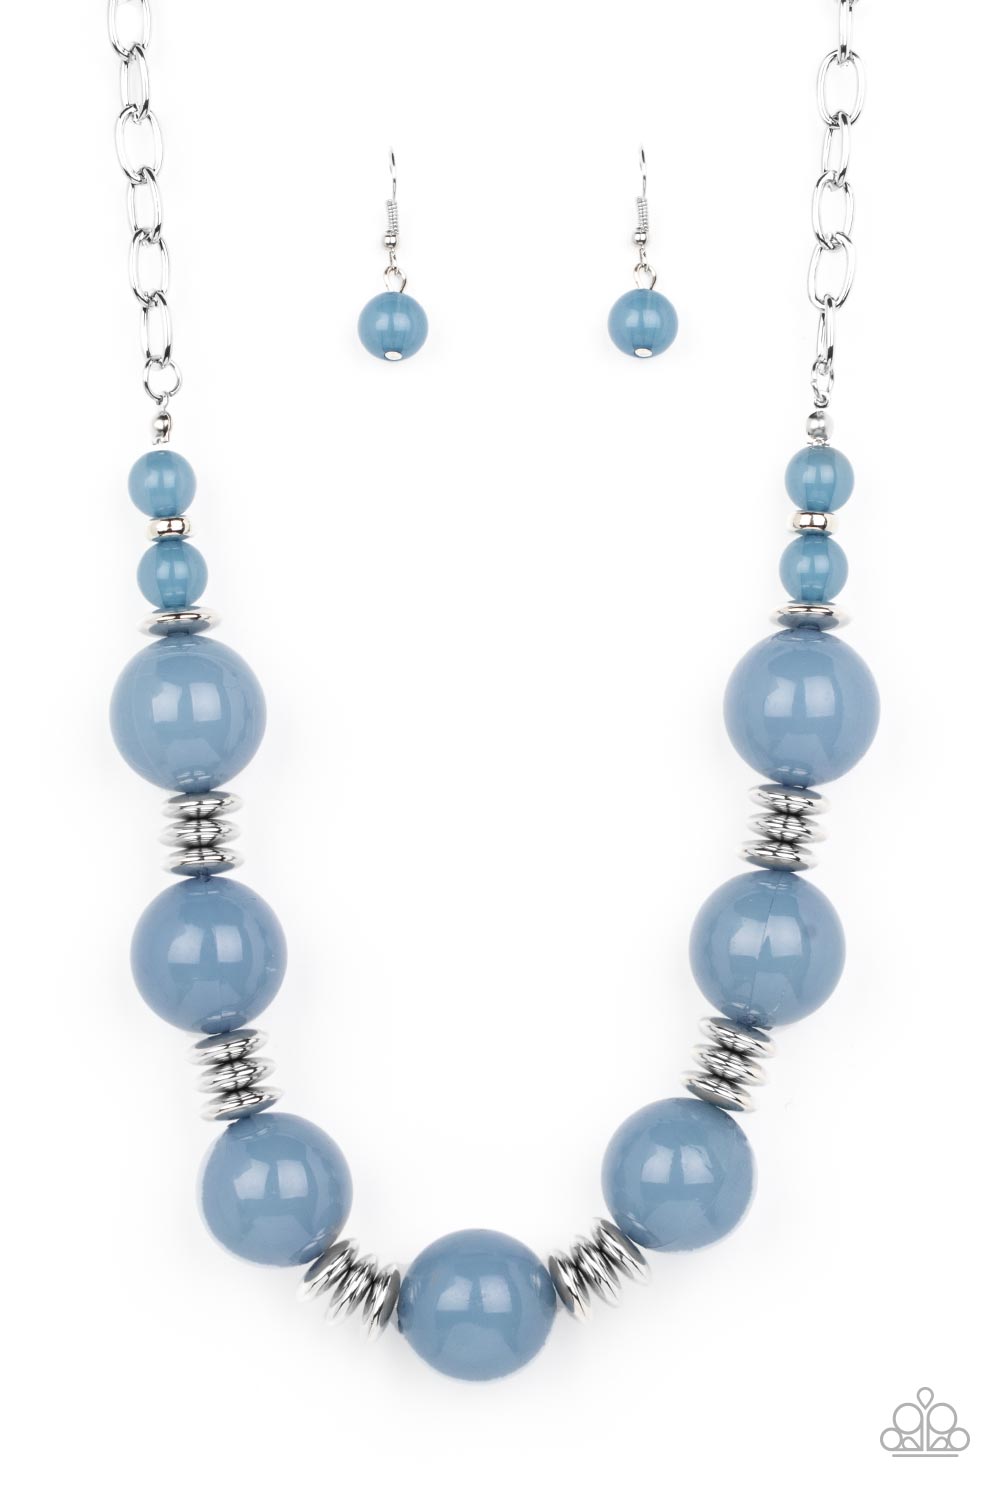 race-to-the-pop-blue-necklace